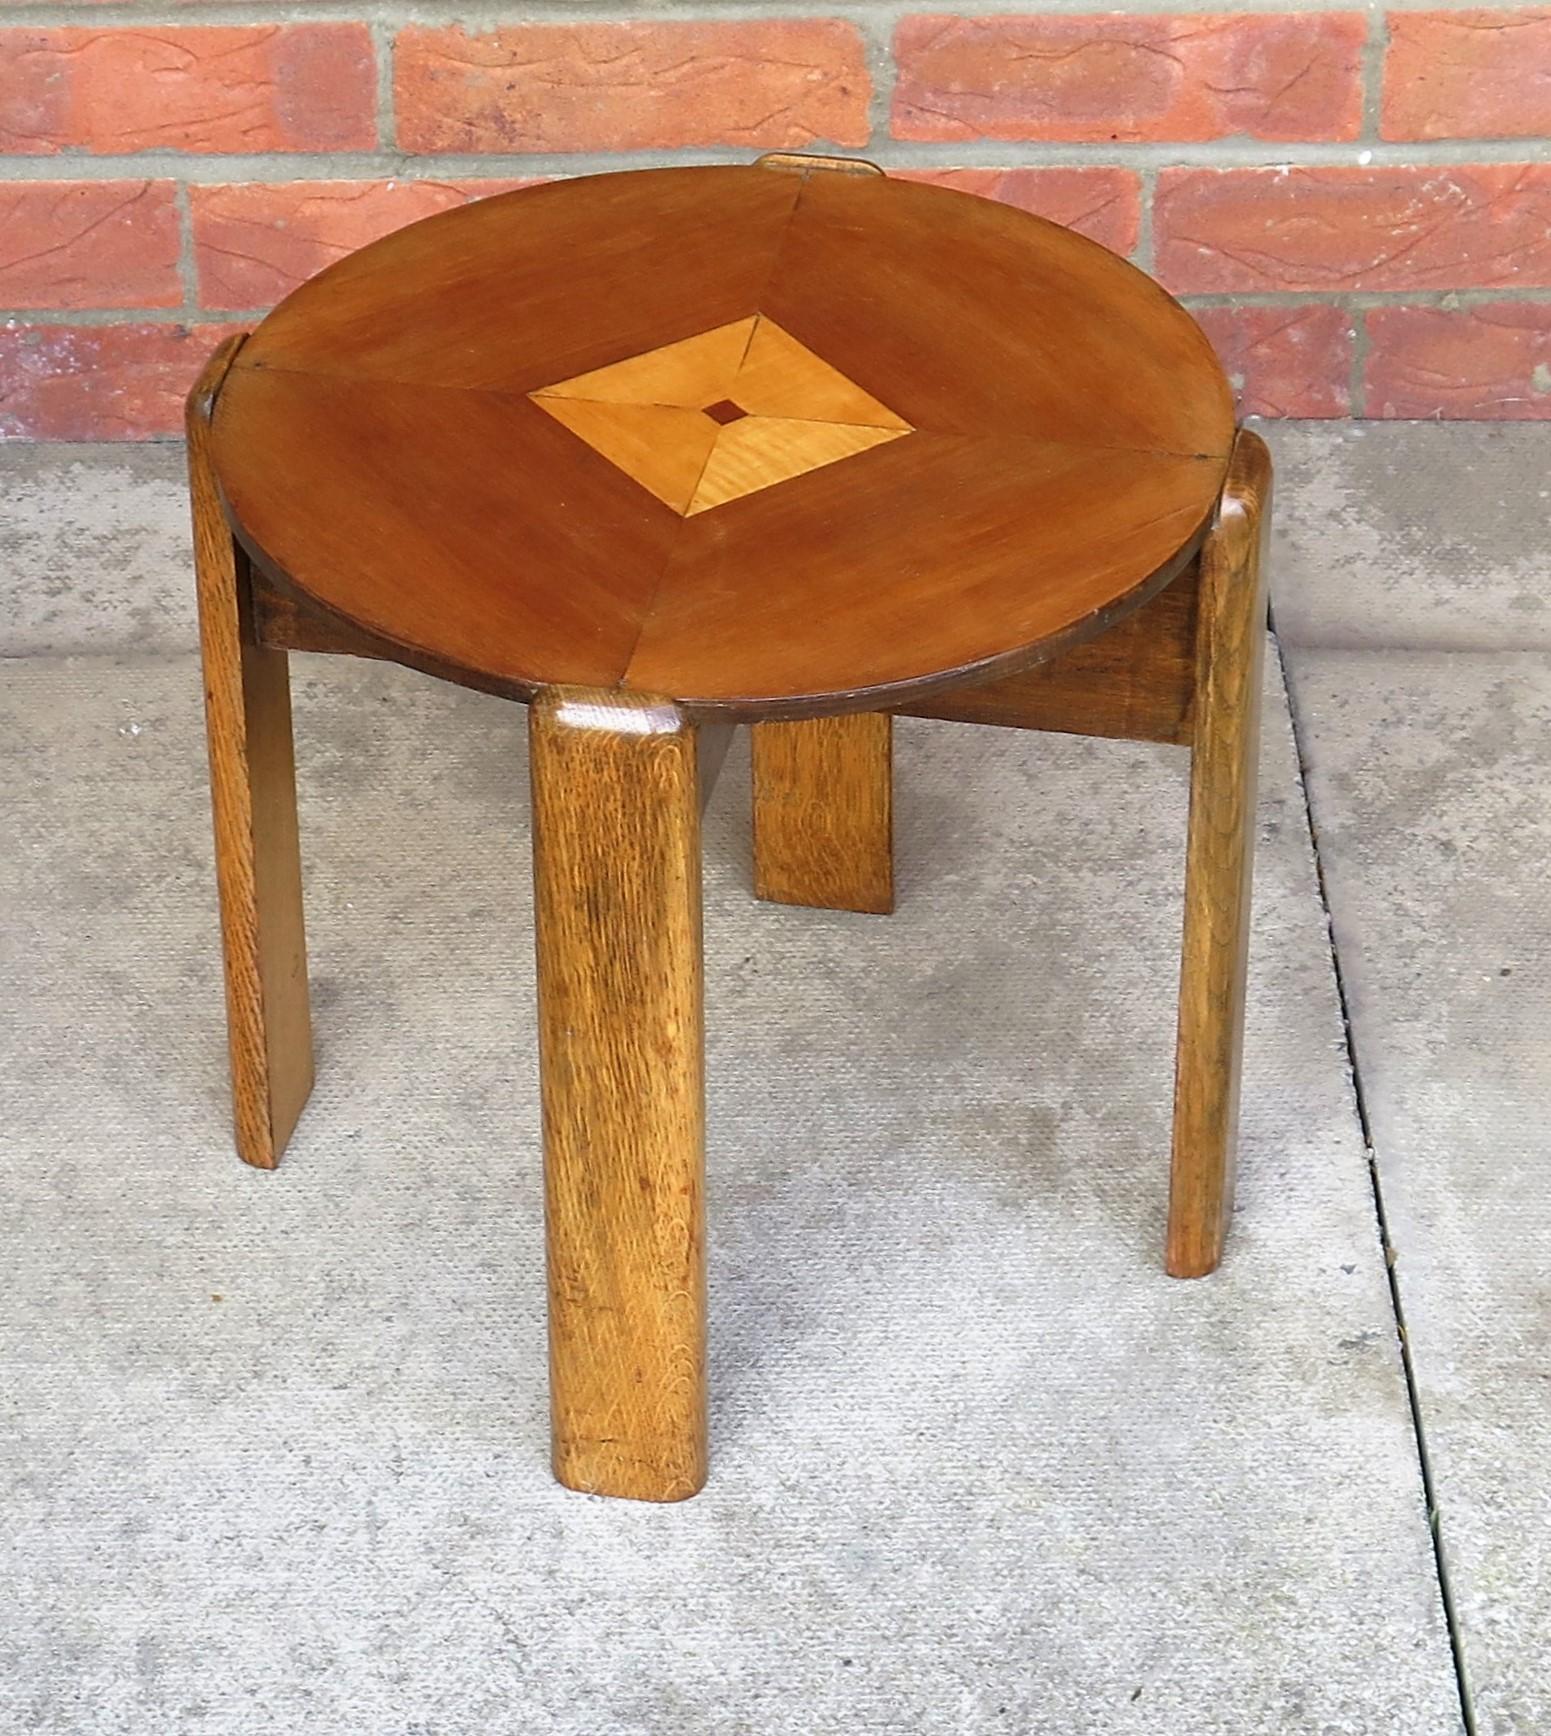 English Art Deco Period Occasional Table with Quarter Veneered Top and Oak Legs, Ca 1930 For Sale